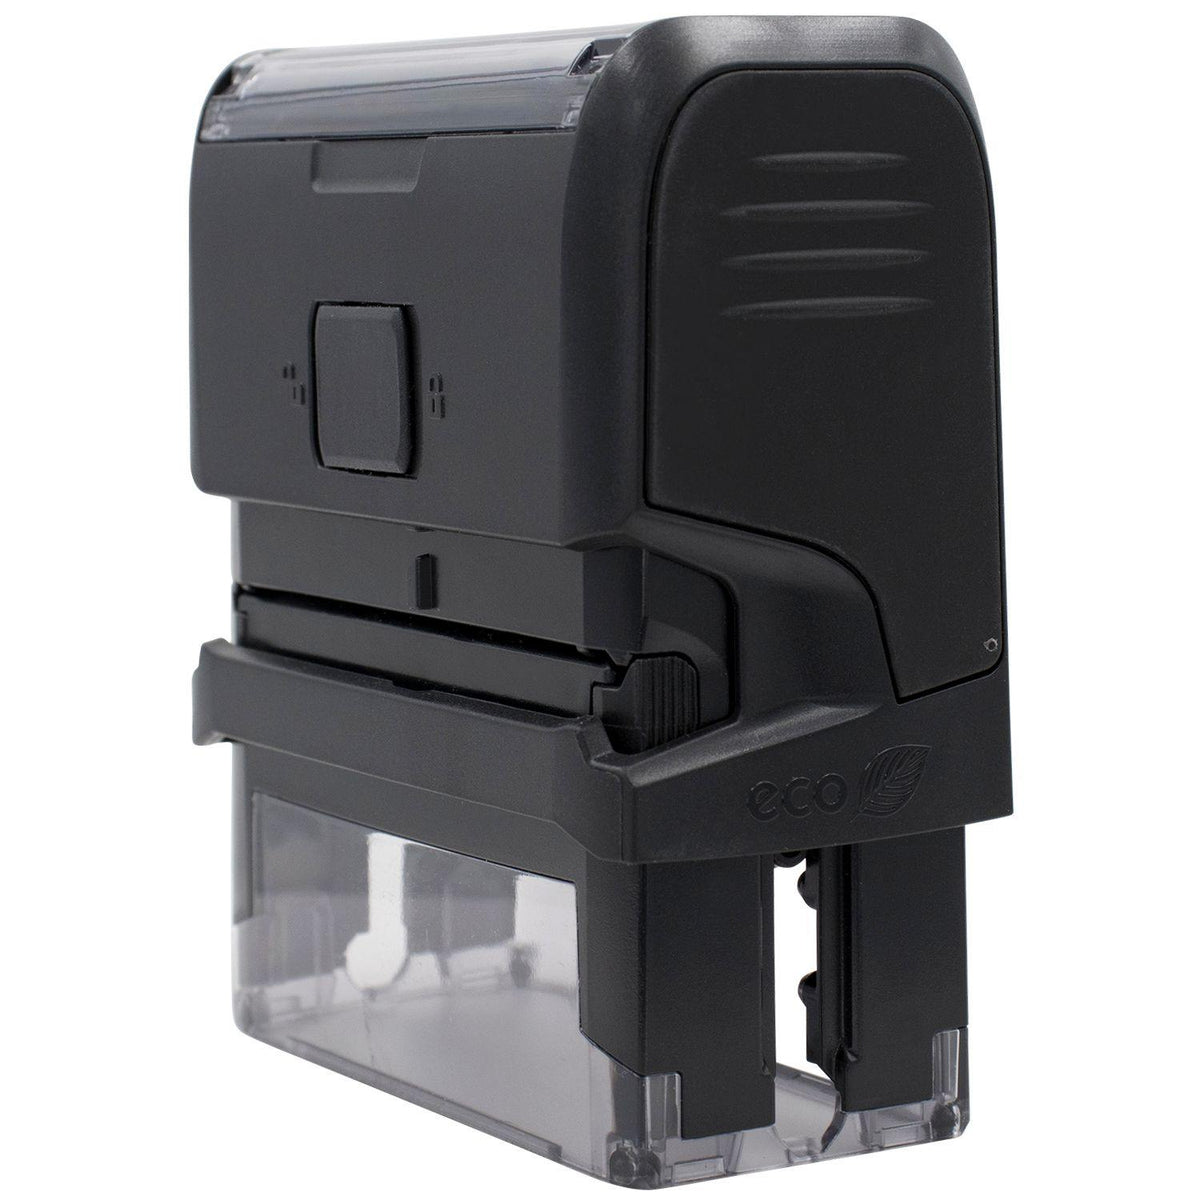 Side View of Large Self Inking Bravo Stamp at an Angle